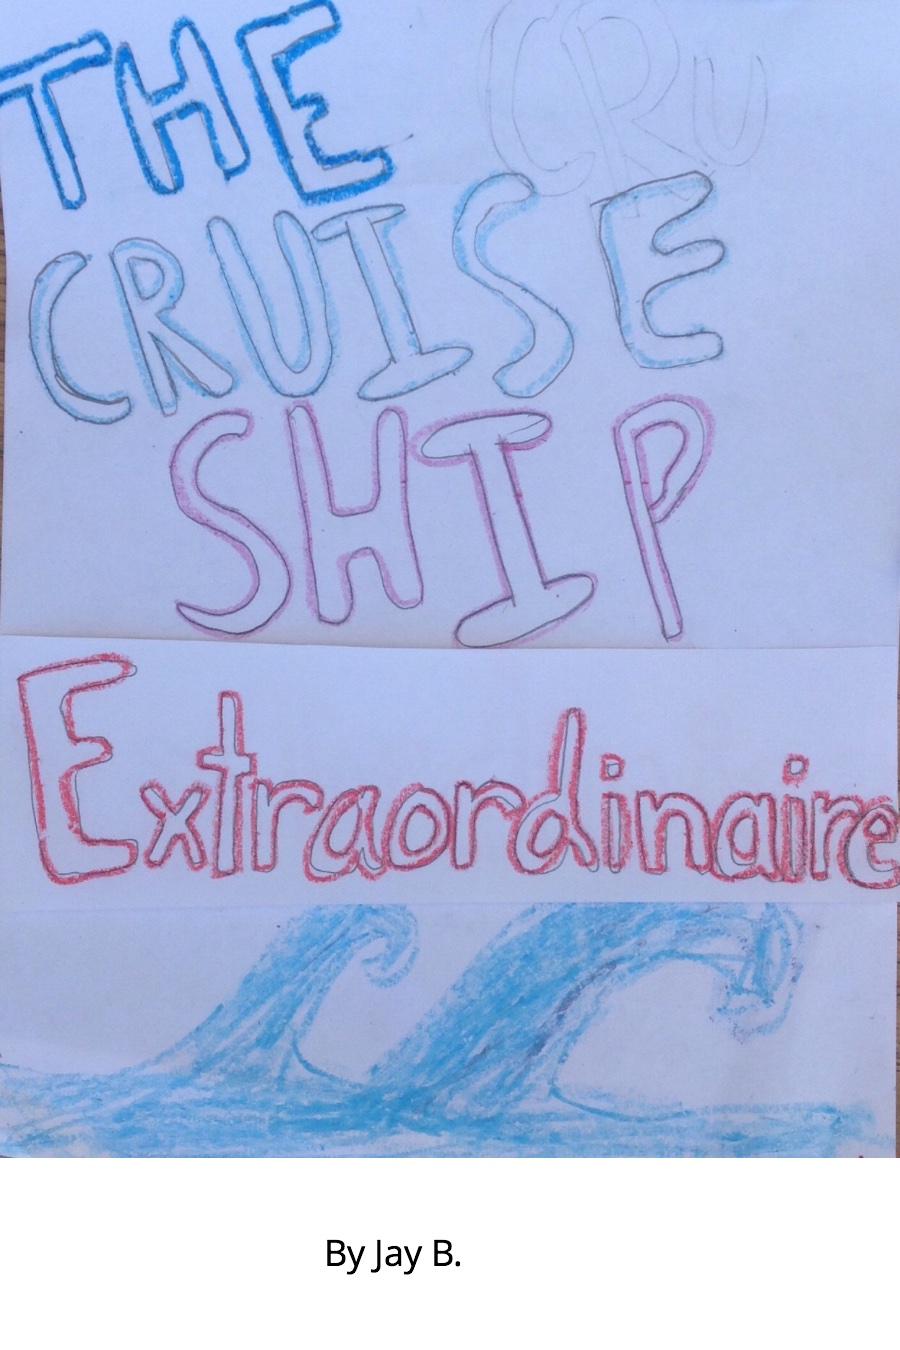 The Cruise Ship Extraordinaire by Jay B